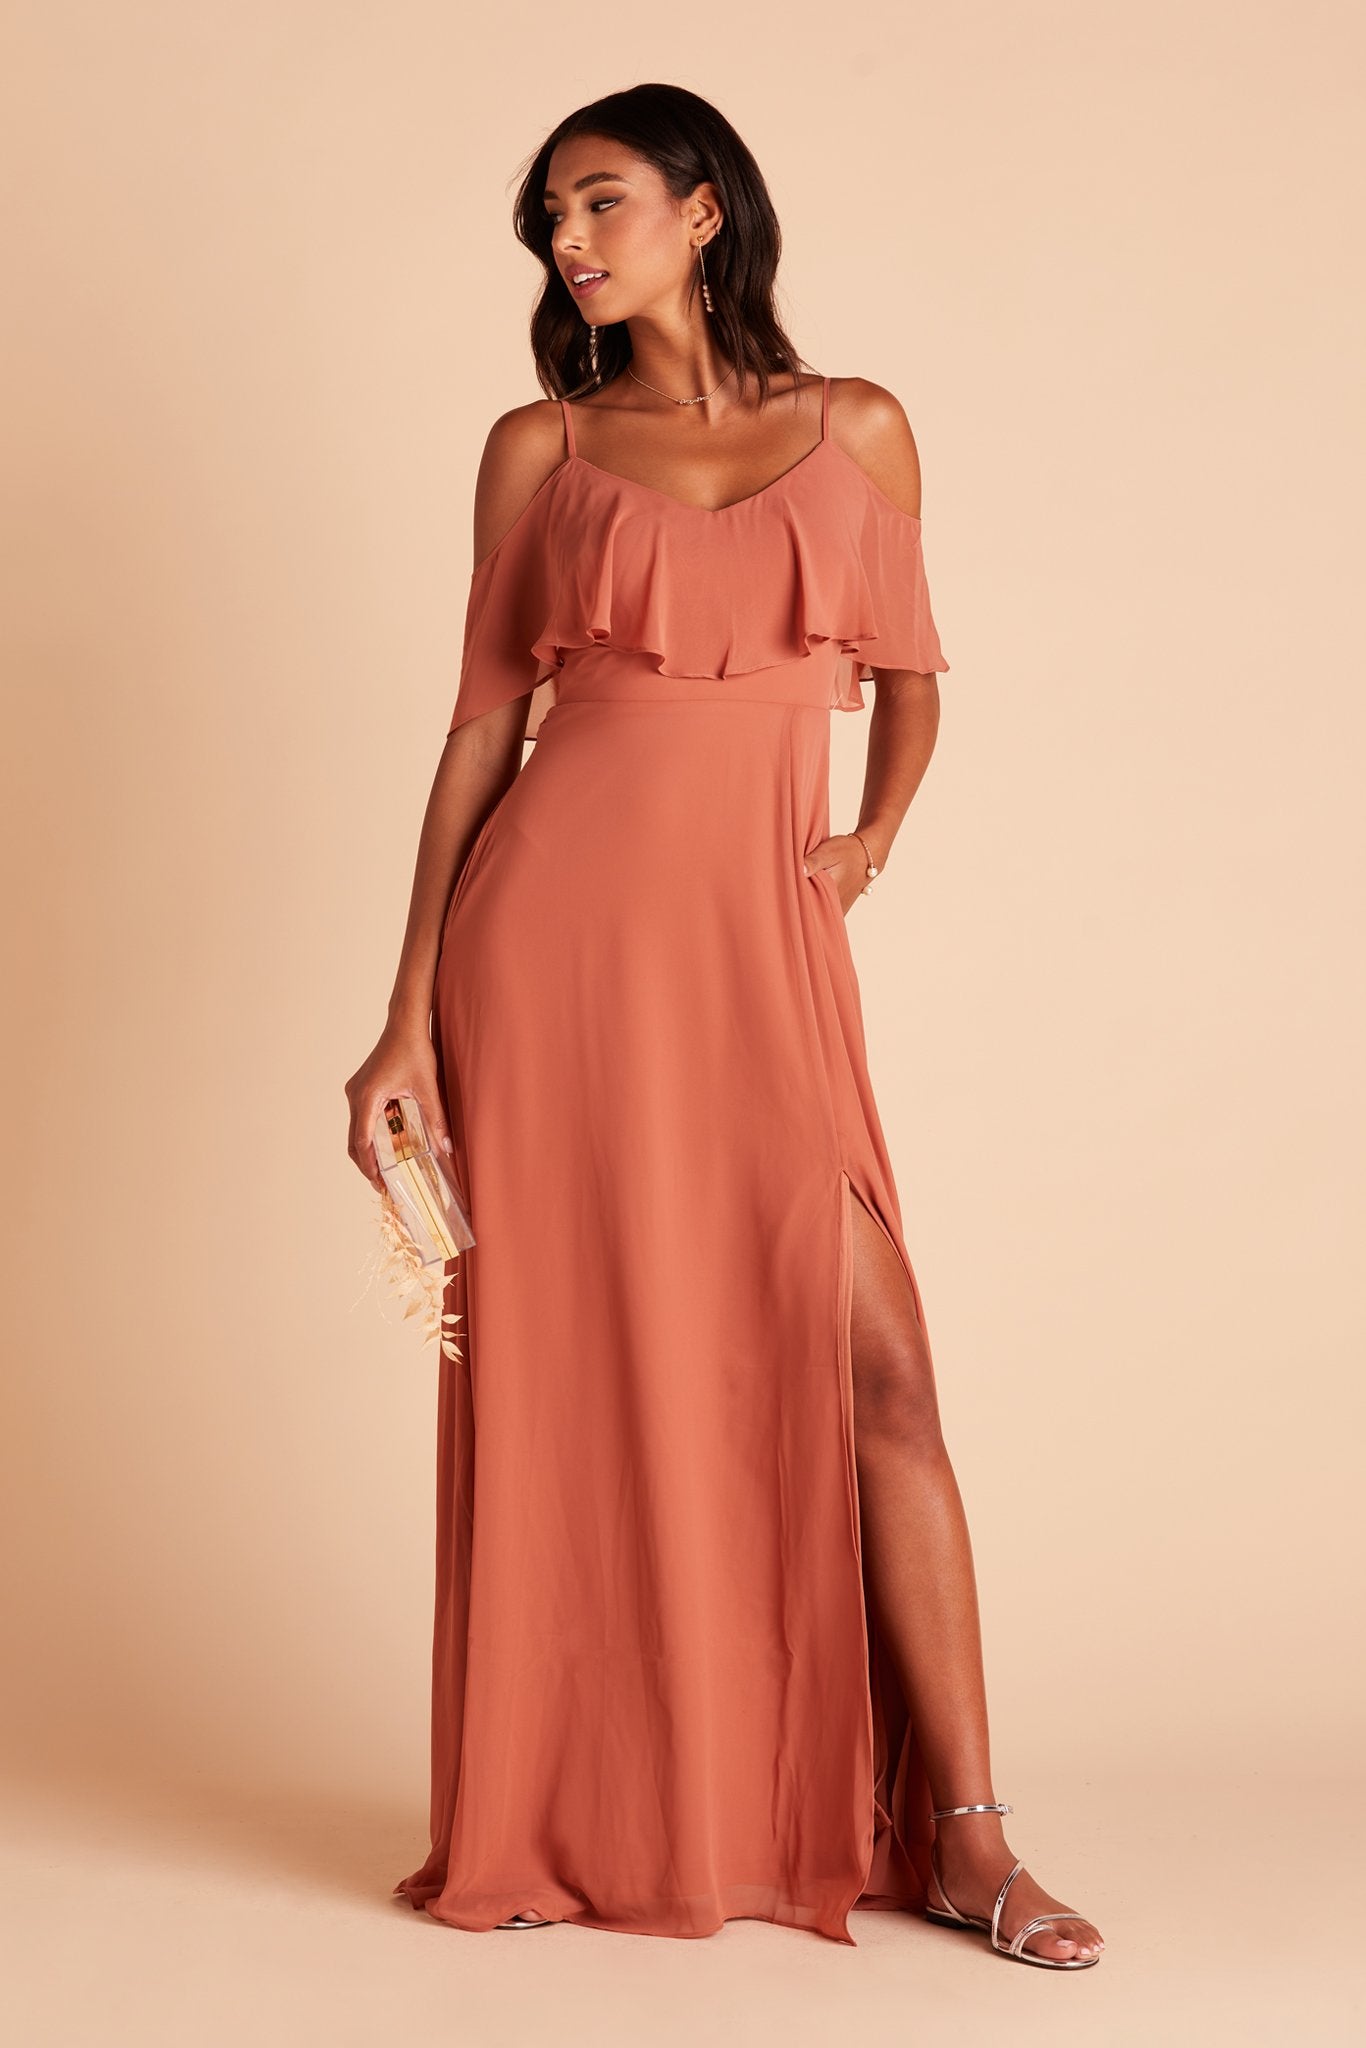 Jane convertible bridesmaid dress with slit in terracotta orange chiffon by Birdy Grey, front view with hand in pocket